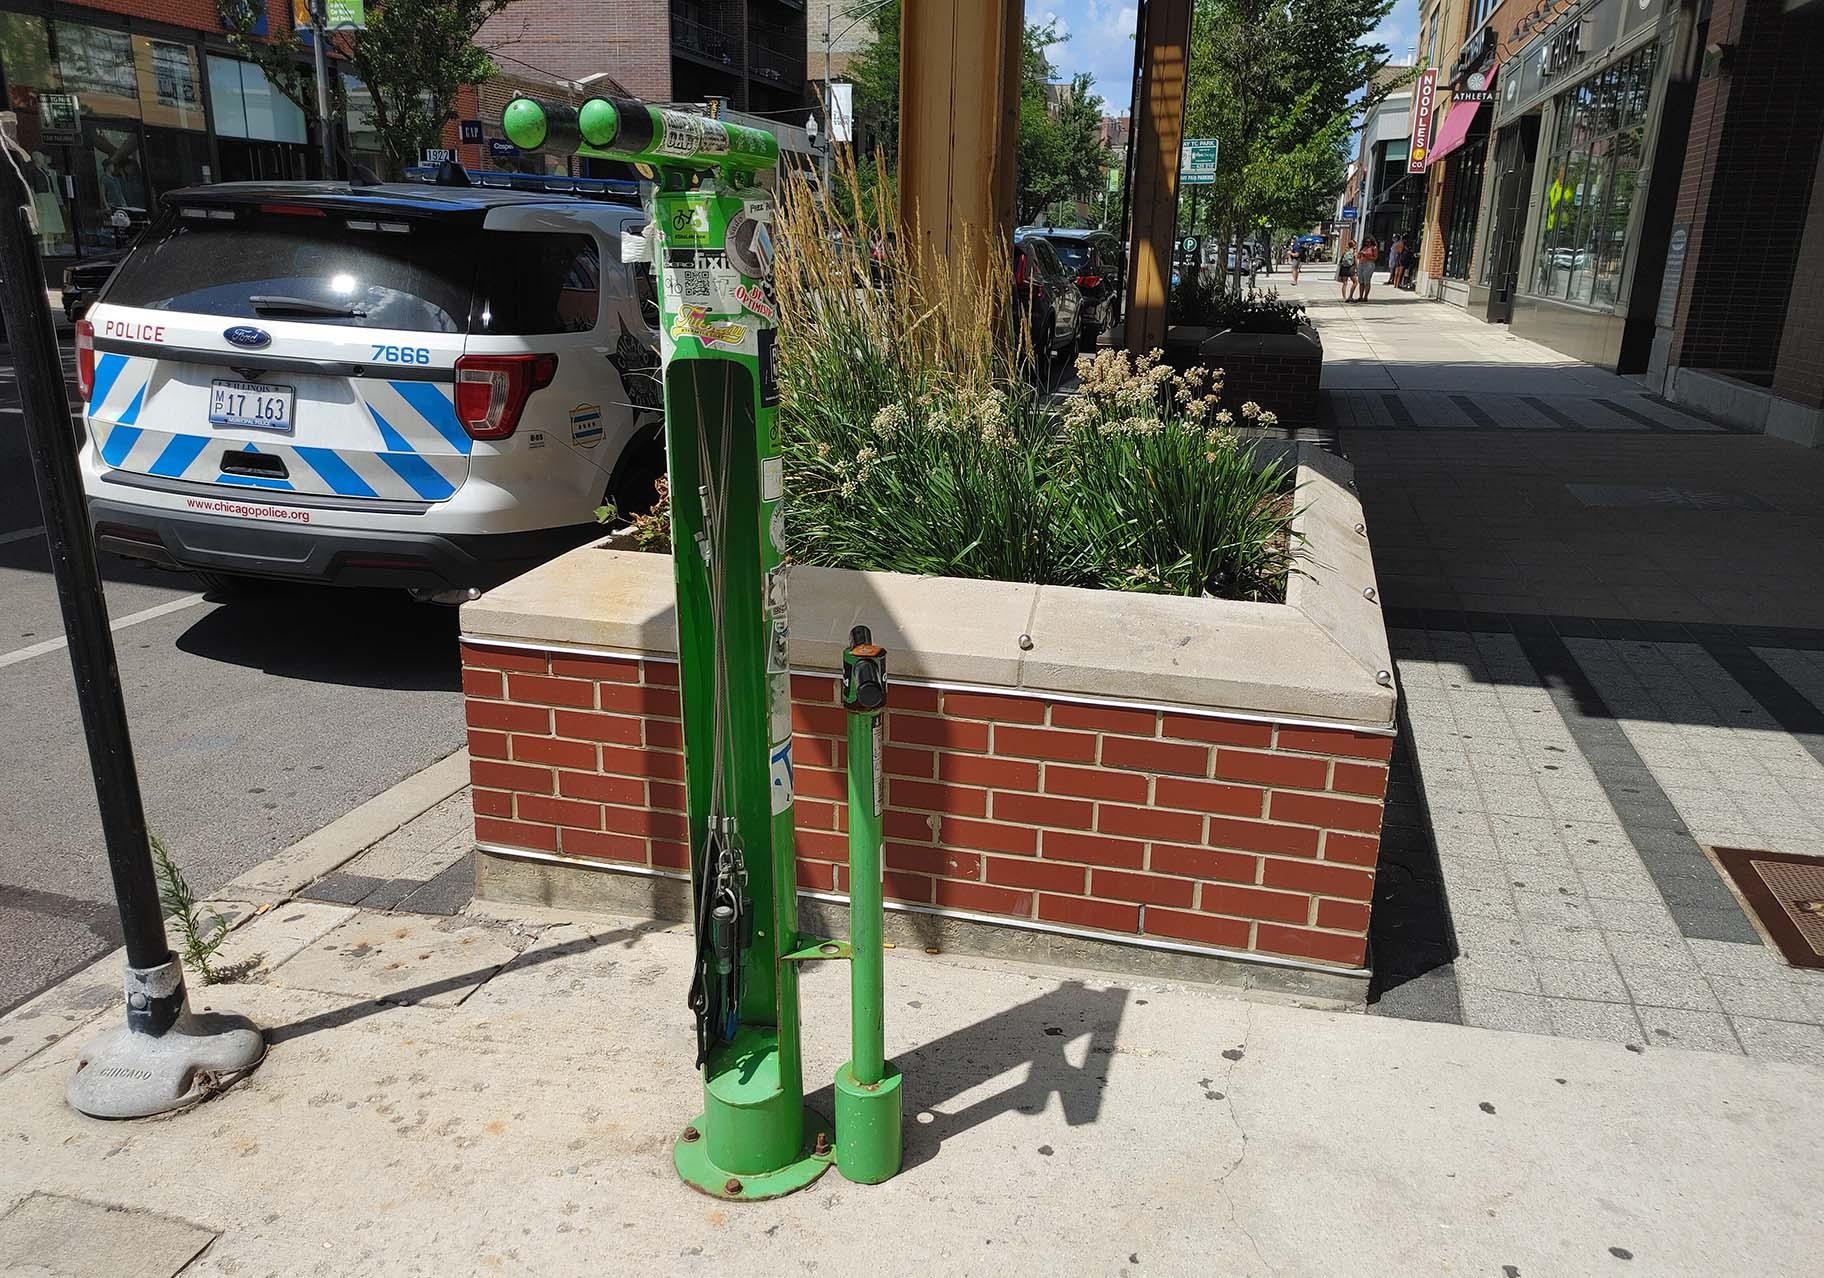 A Fixit bike repair station outside the Southport Brown Line CTA L stop. (Erica Gunderson / WTTW News)